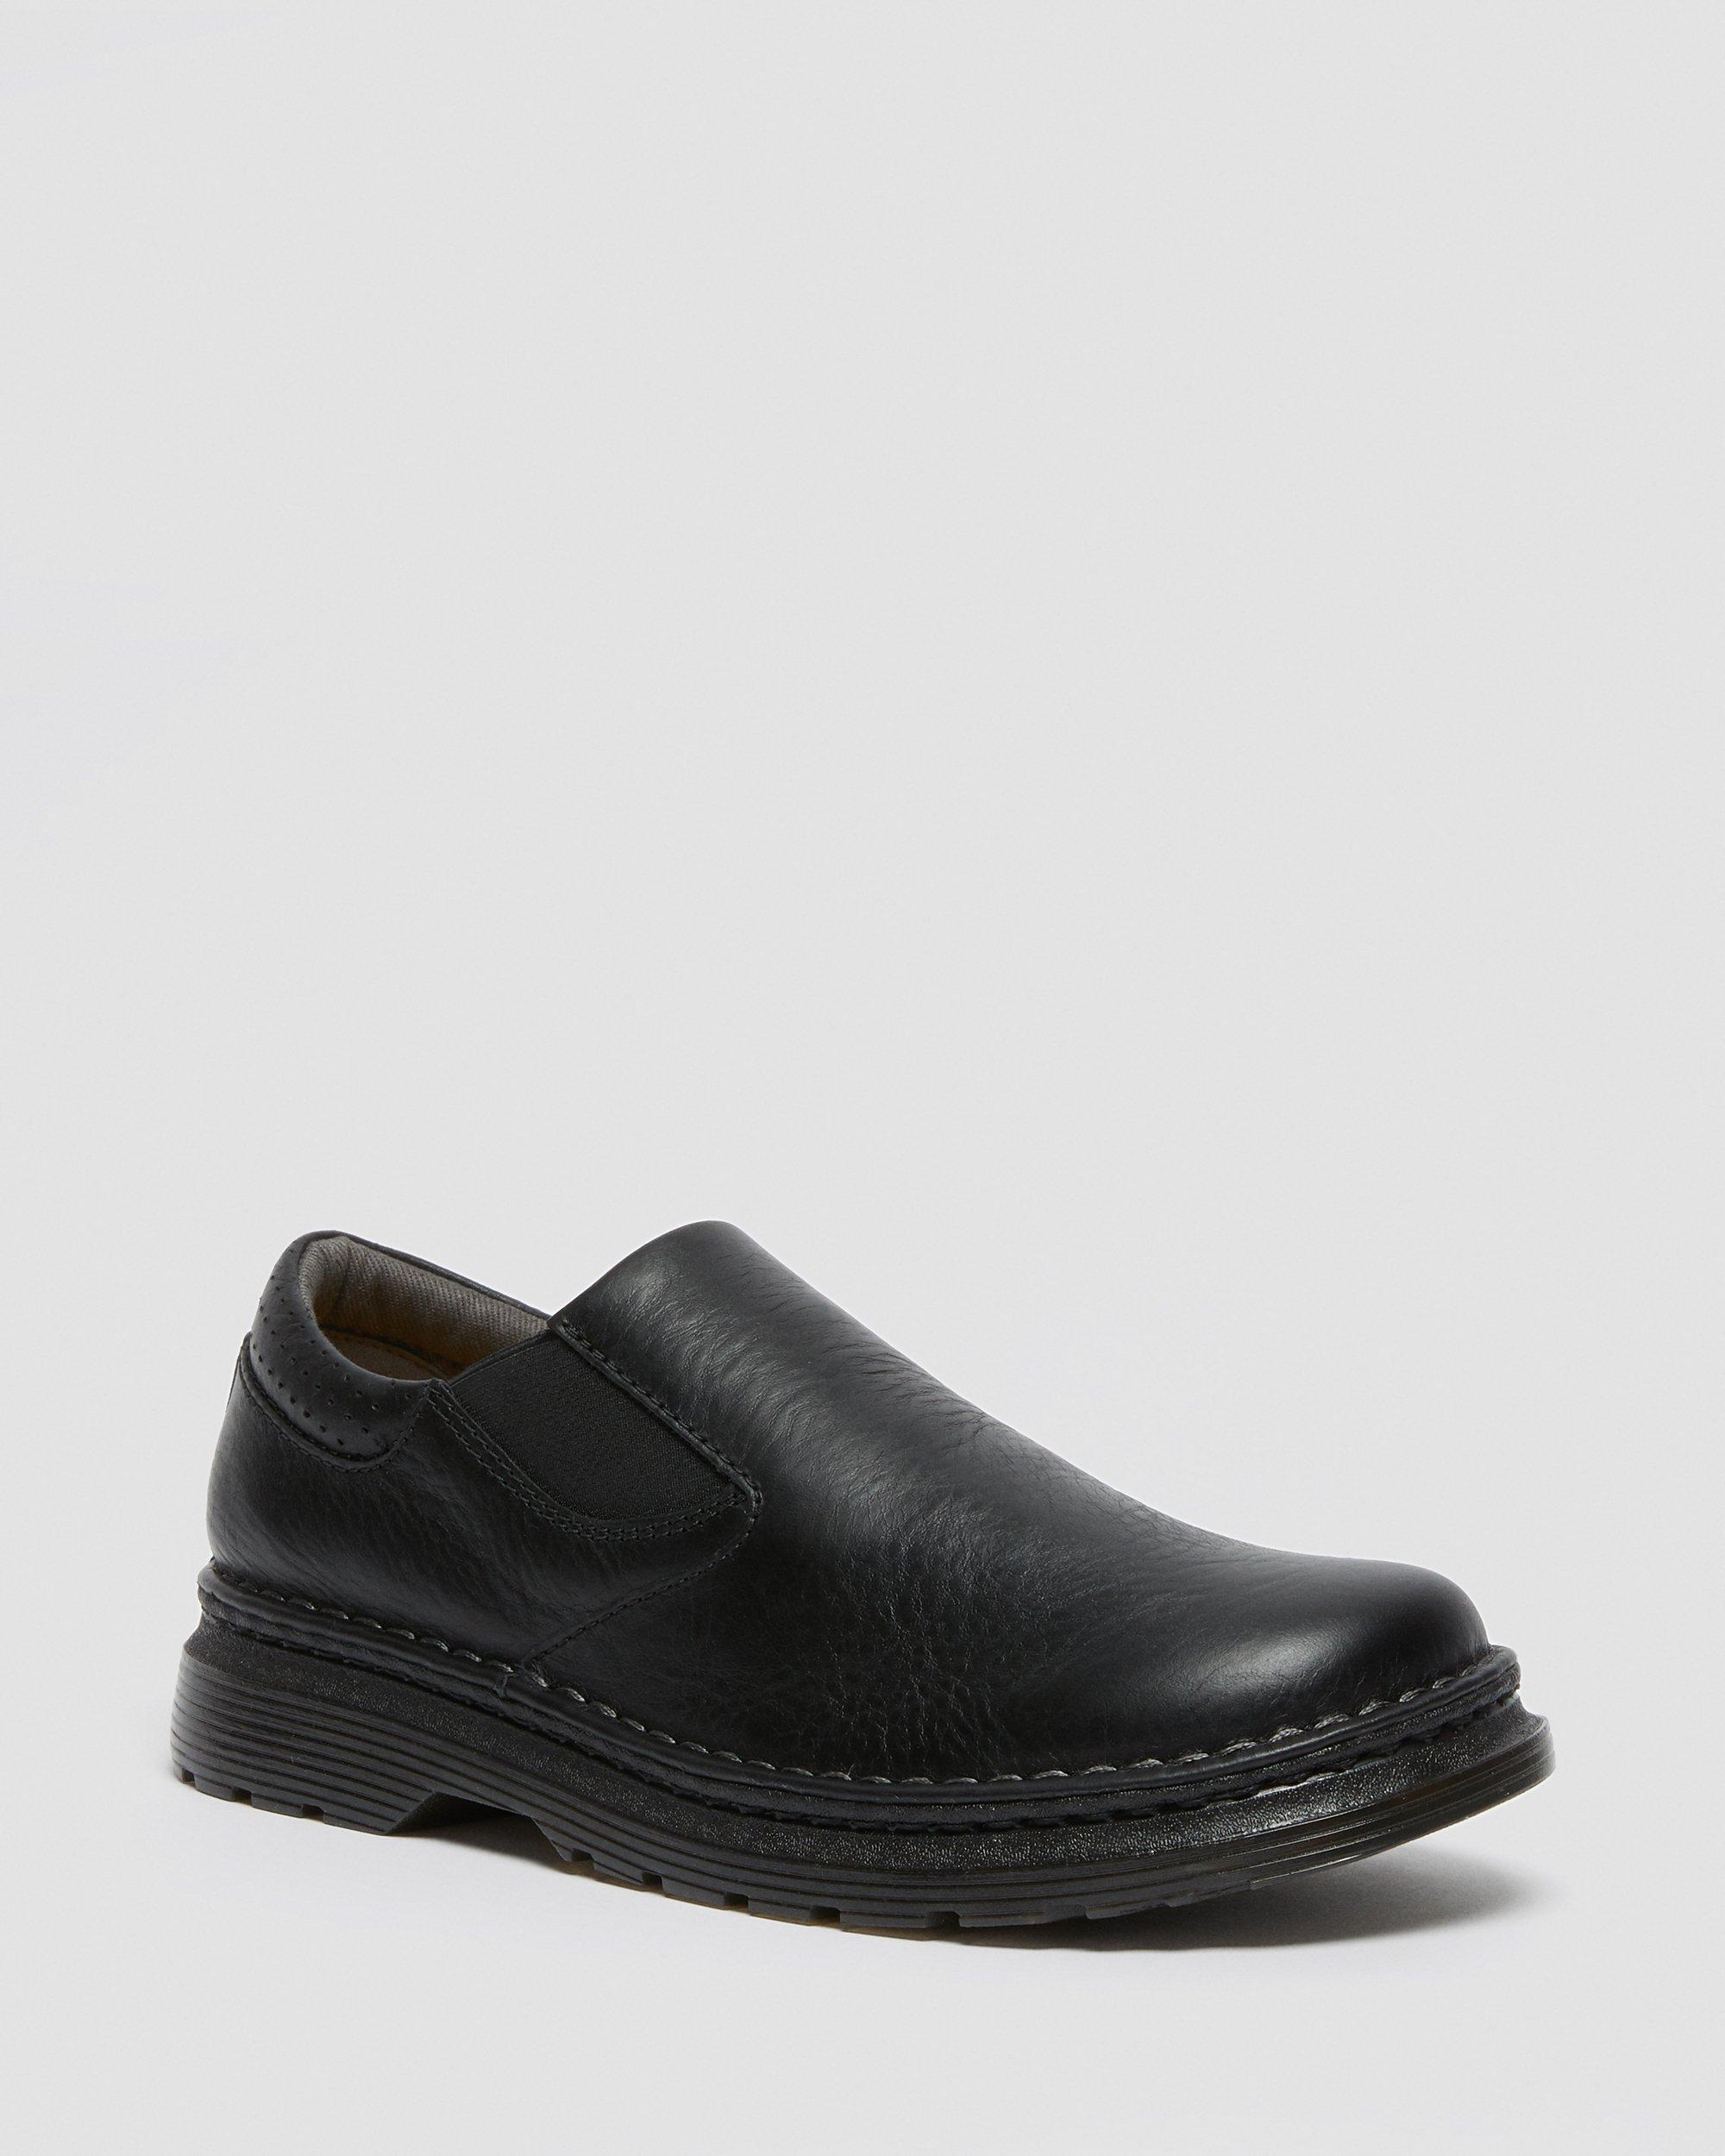 Mens Patent Leather Slipon Loafers